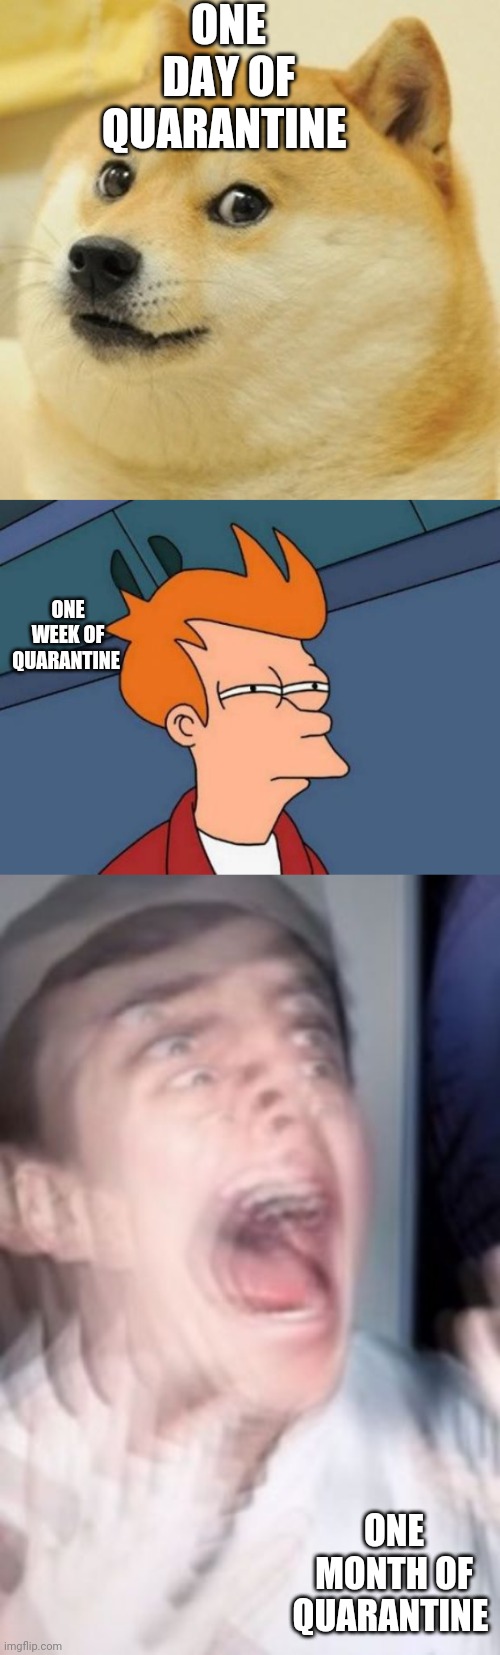 ONE DAY OF QUARANTINE; ONE WEEK OF QUARANTINE; ONE MONTH OF QUARANTINE | image tagged in memes,futurama fry,doge,freaking out | made w/ Imgflip meme maker